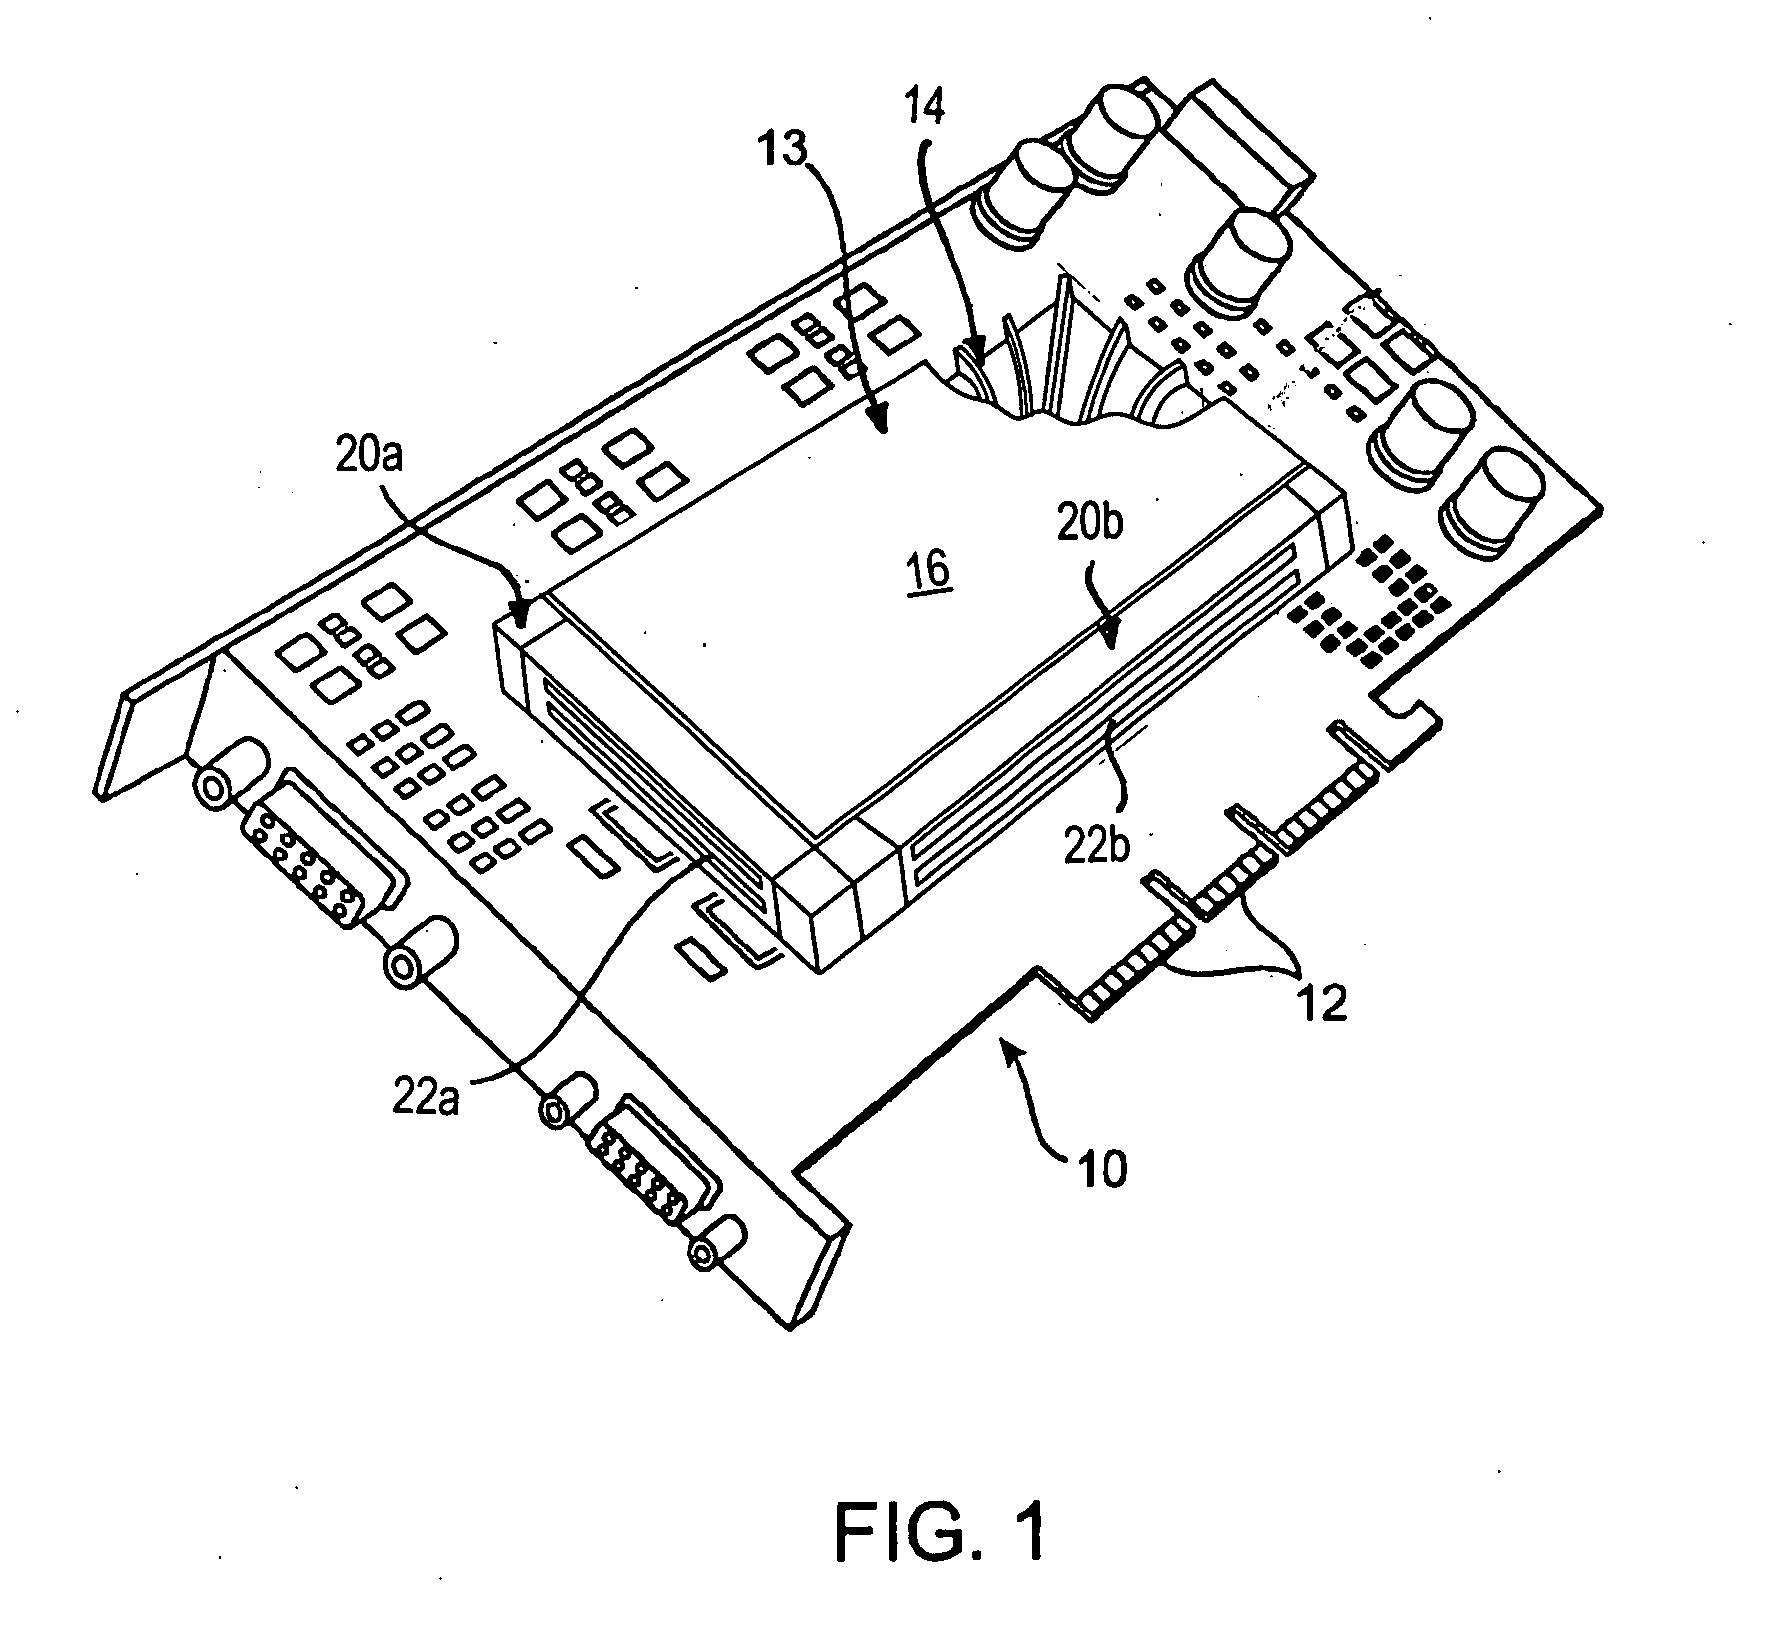 Cooling system with miniature fans for circuit board devices